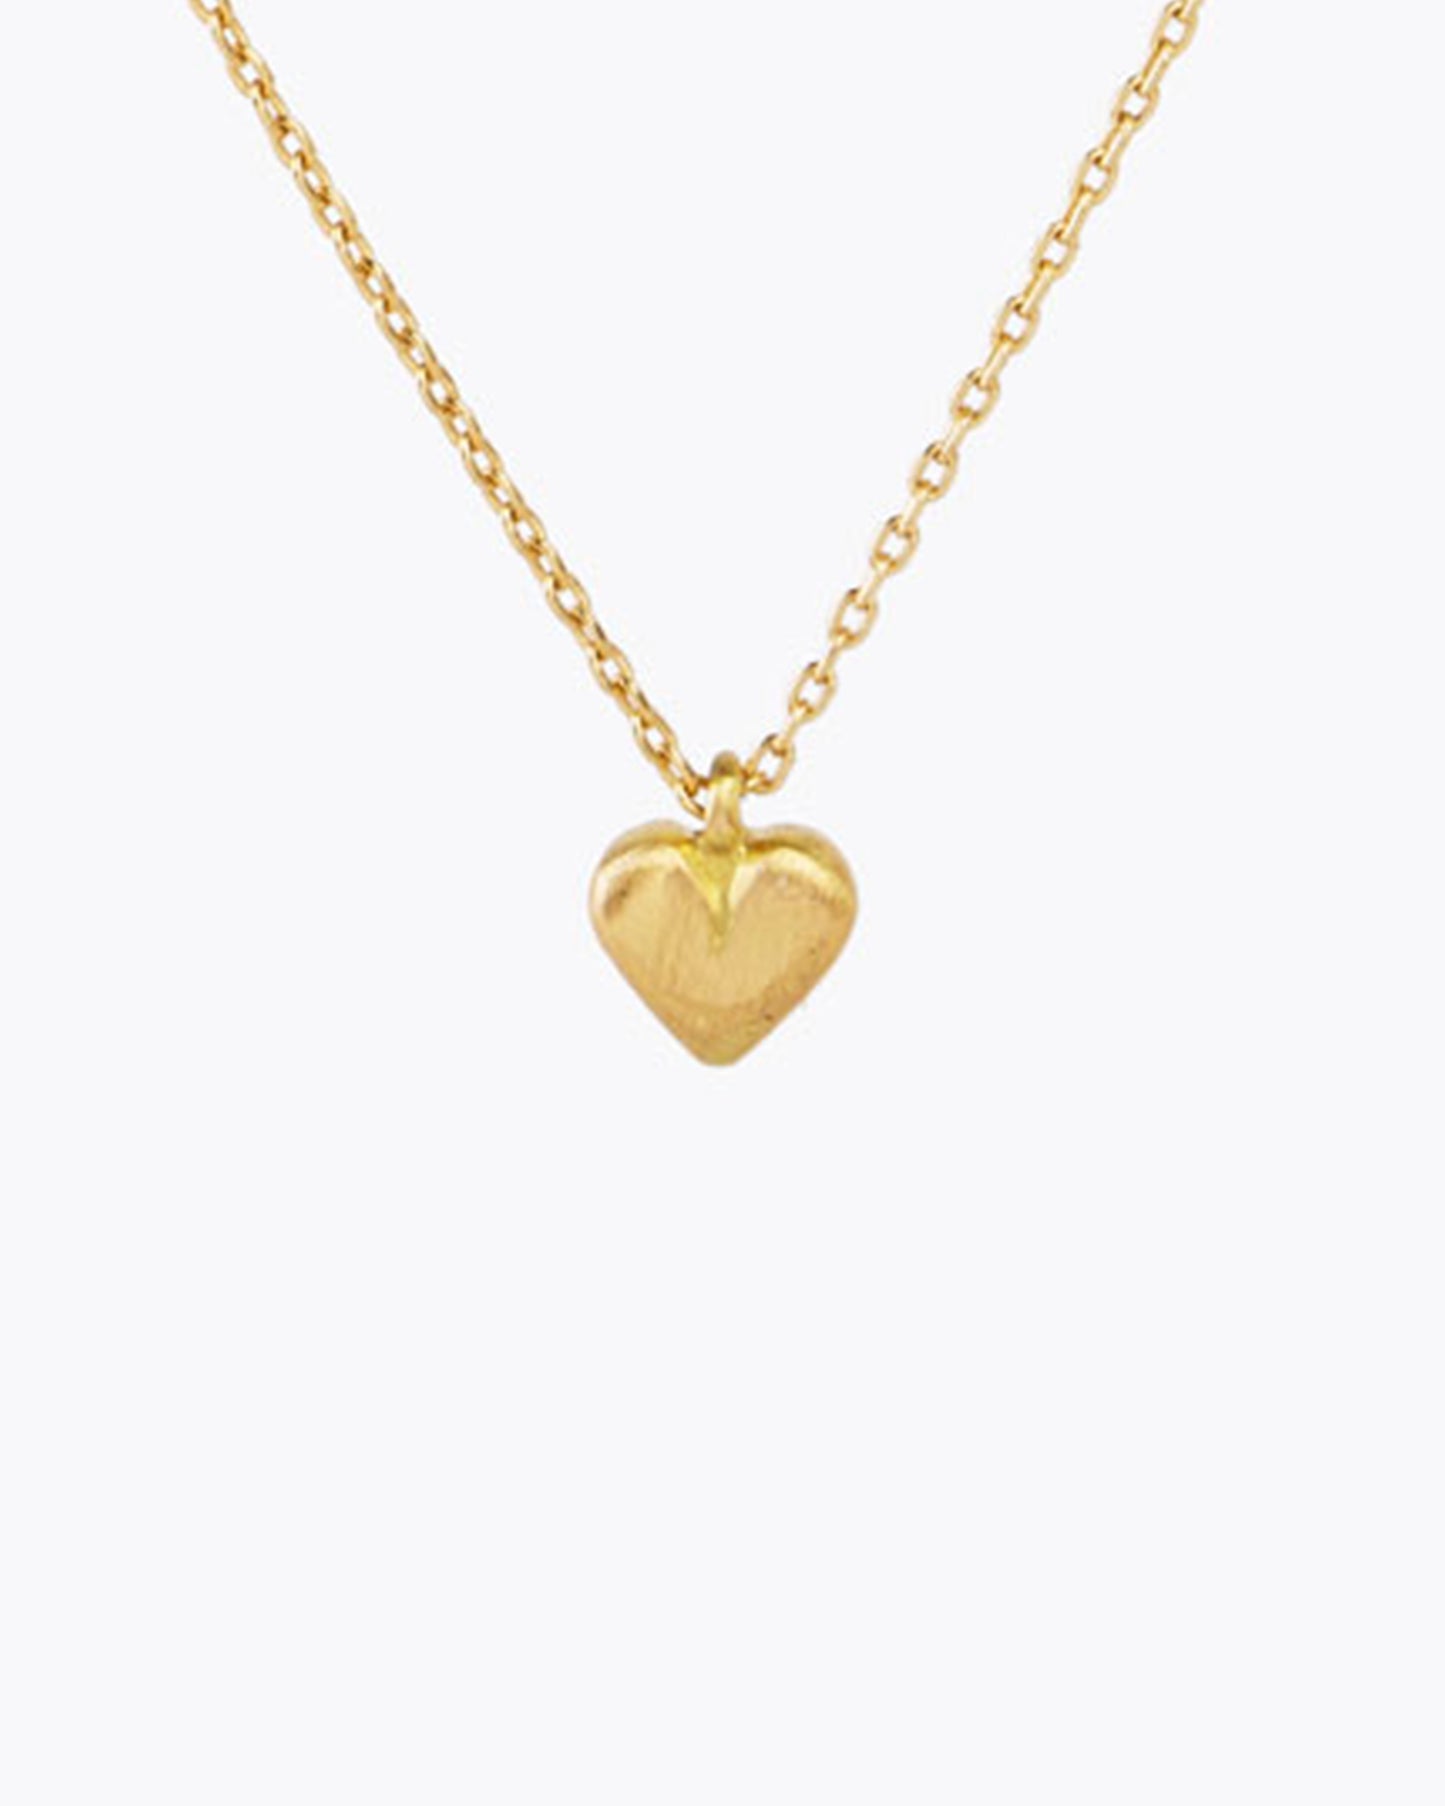 A simple but elegant heart necklace, with a brushed gold finish